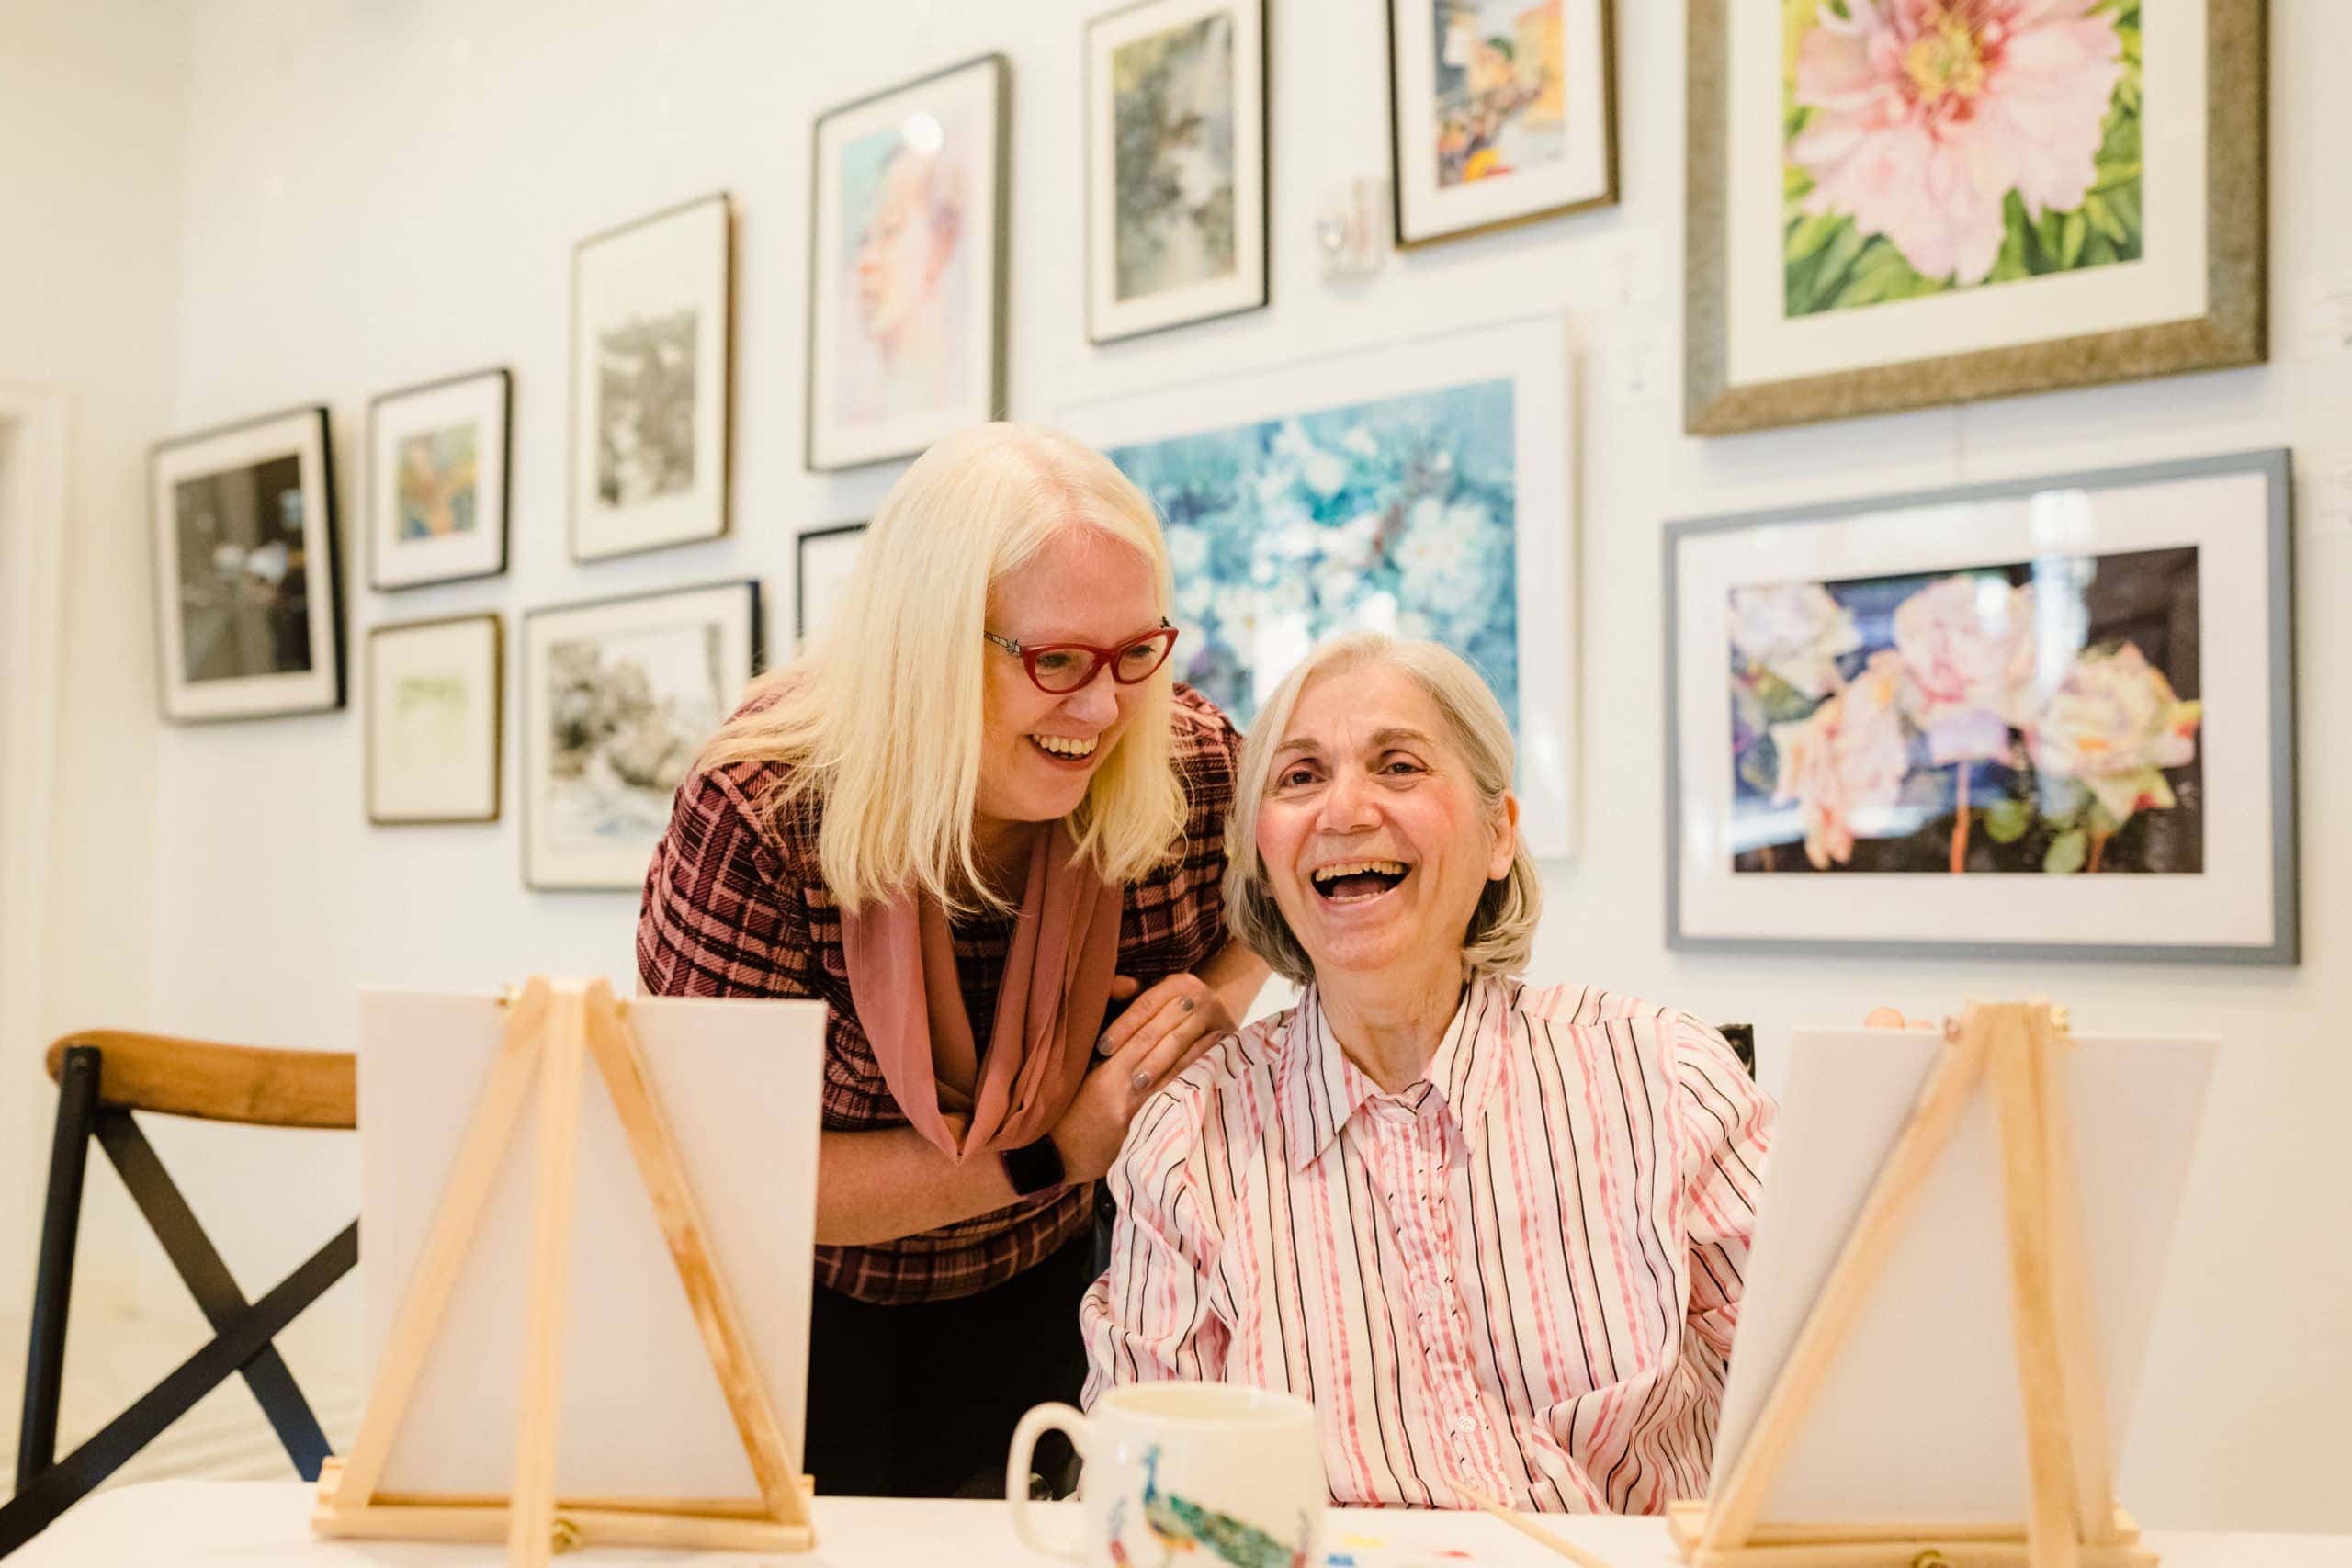 Tonya Embly with resident in art studio